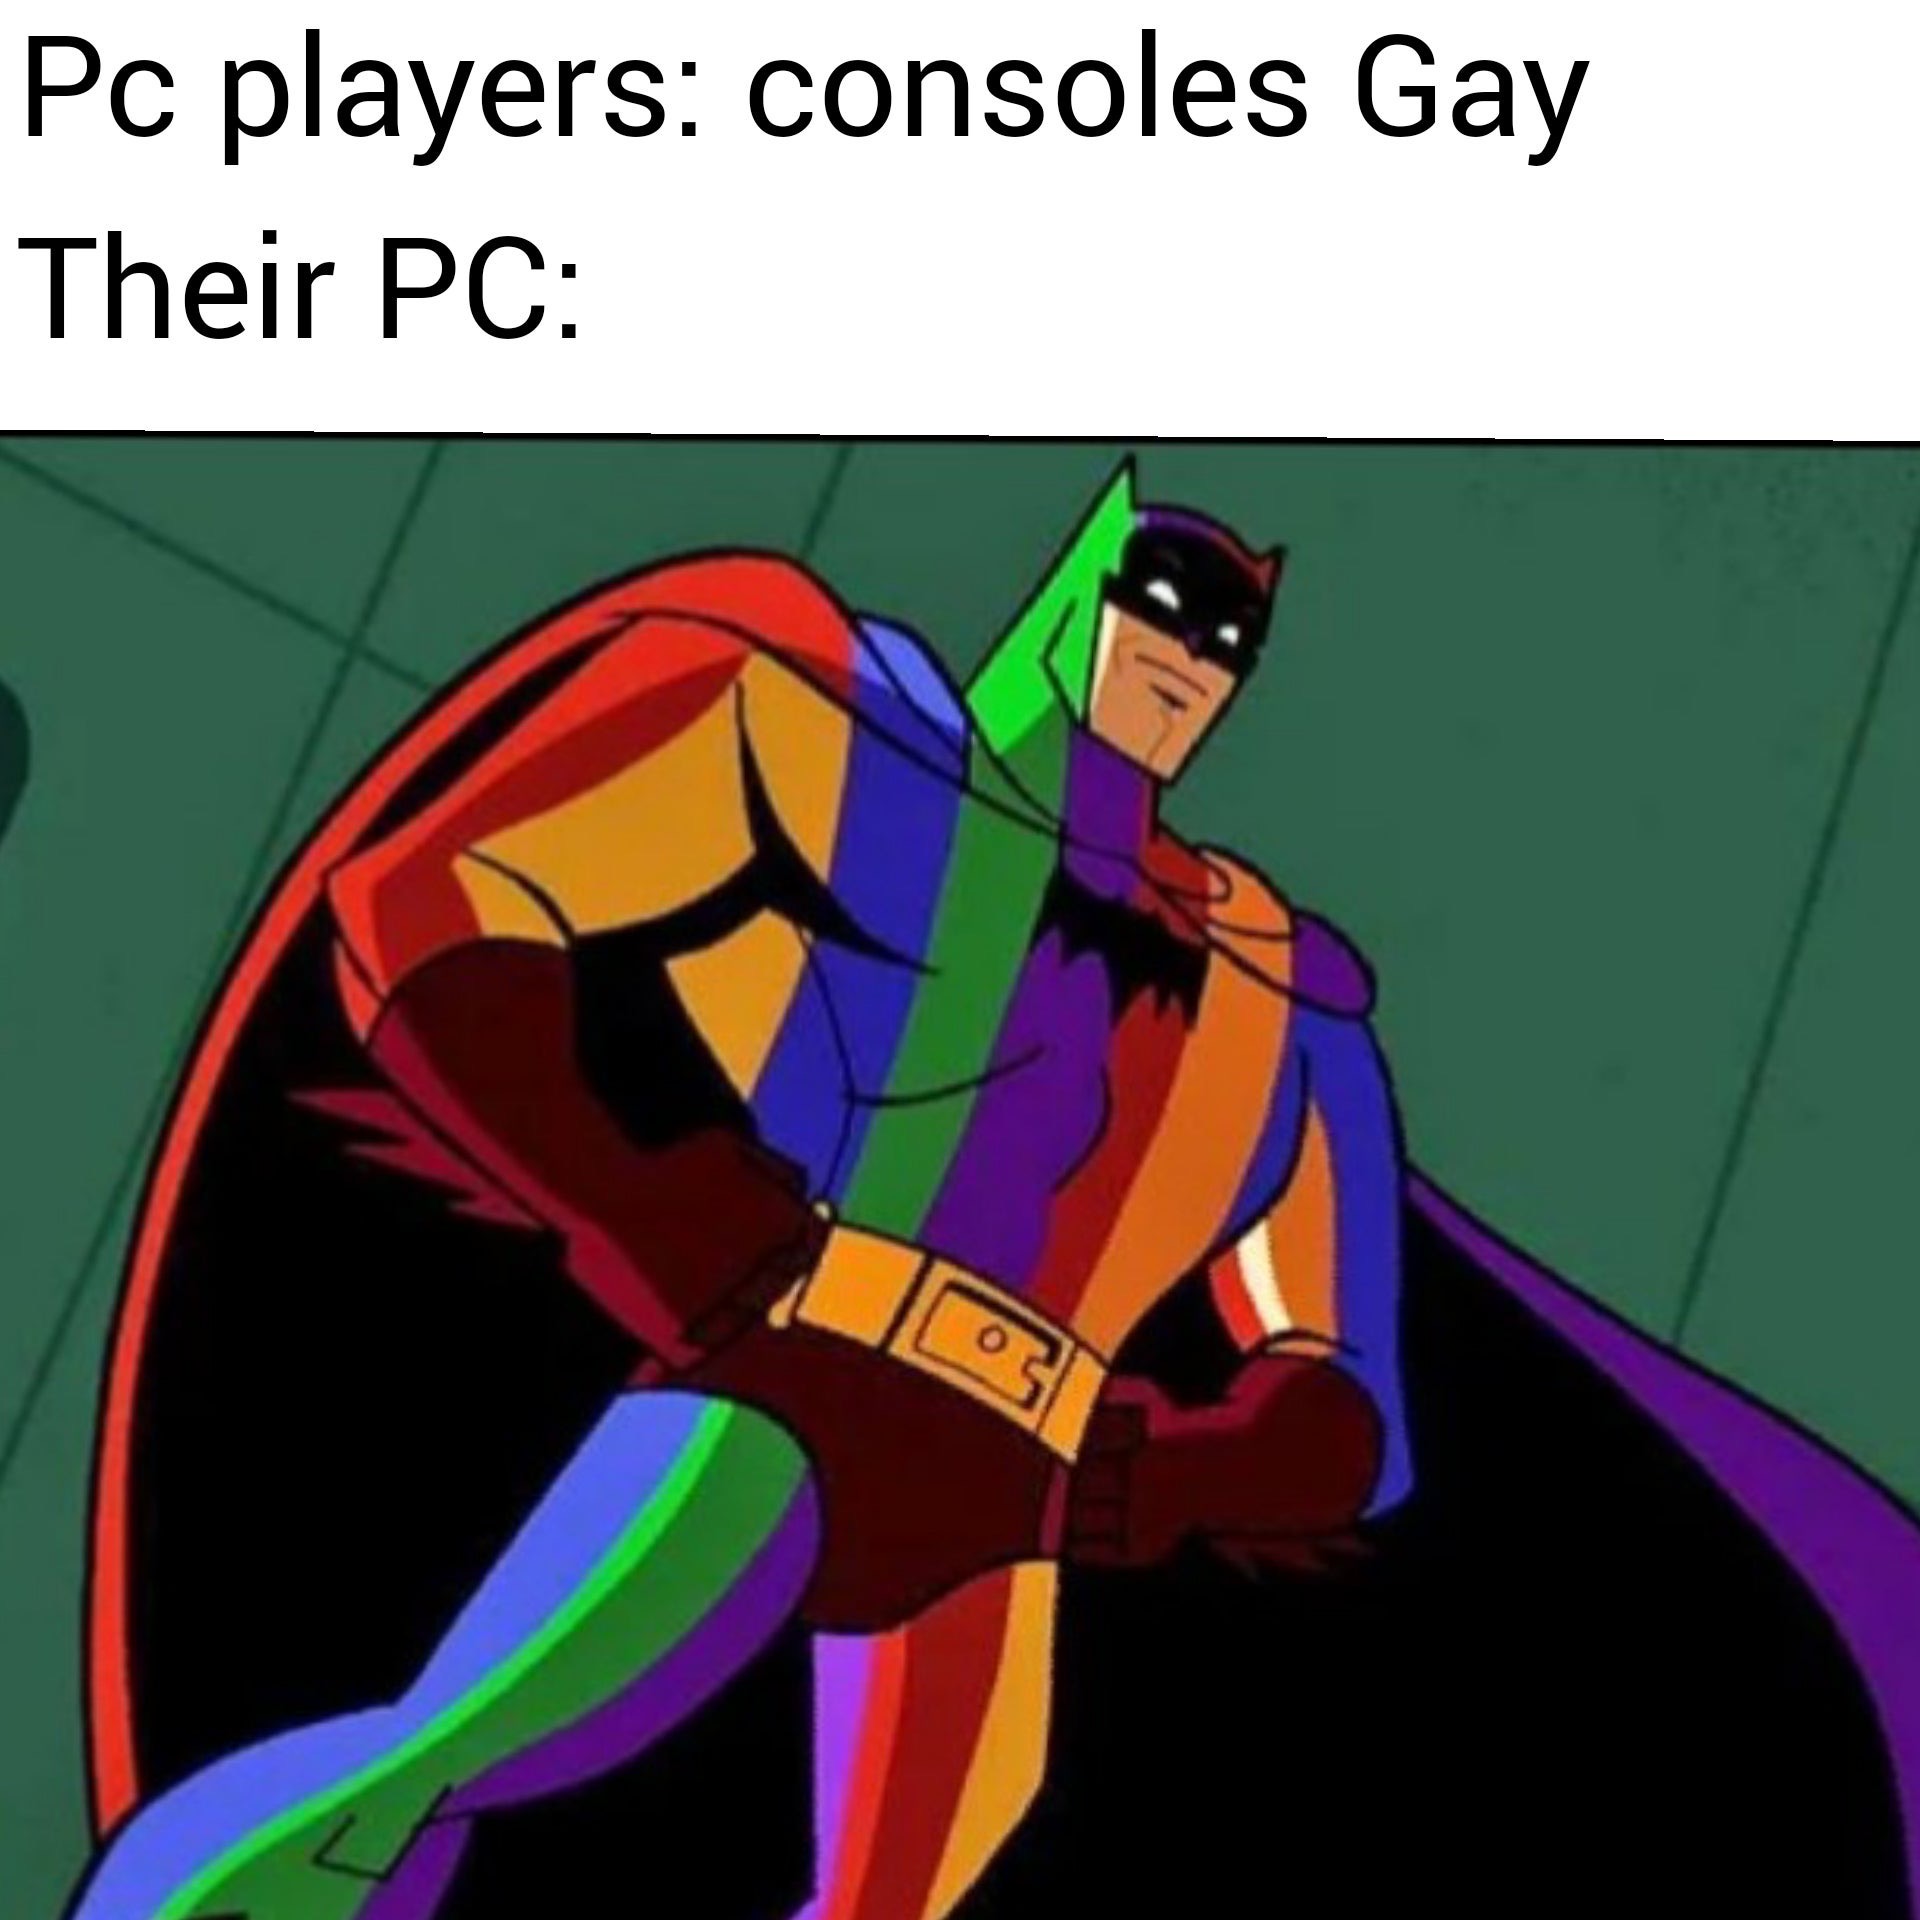 hugeplateofketchup8 -  rainbow batman - Pc players consoles Gay Their Pc O